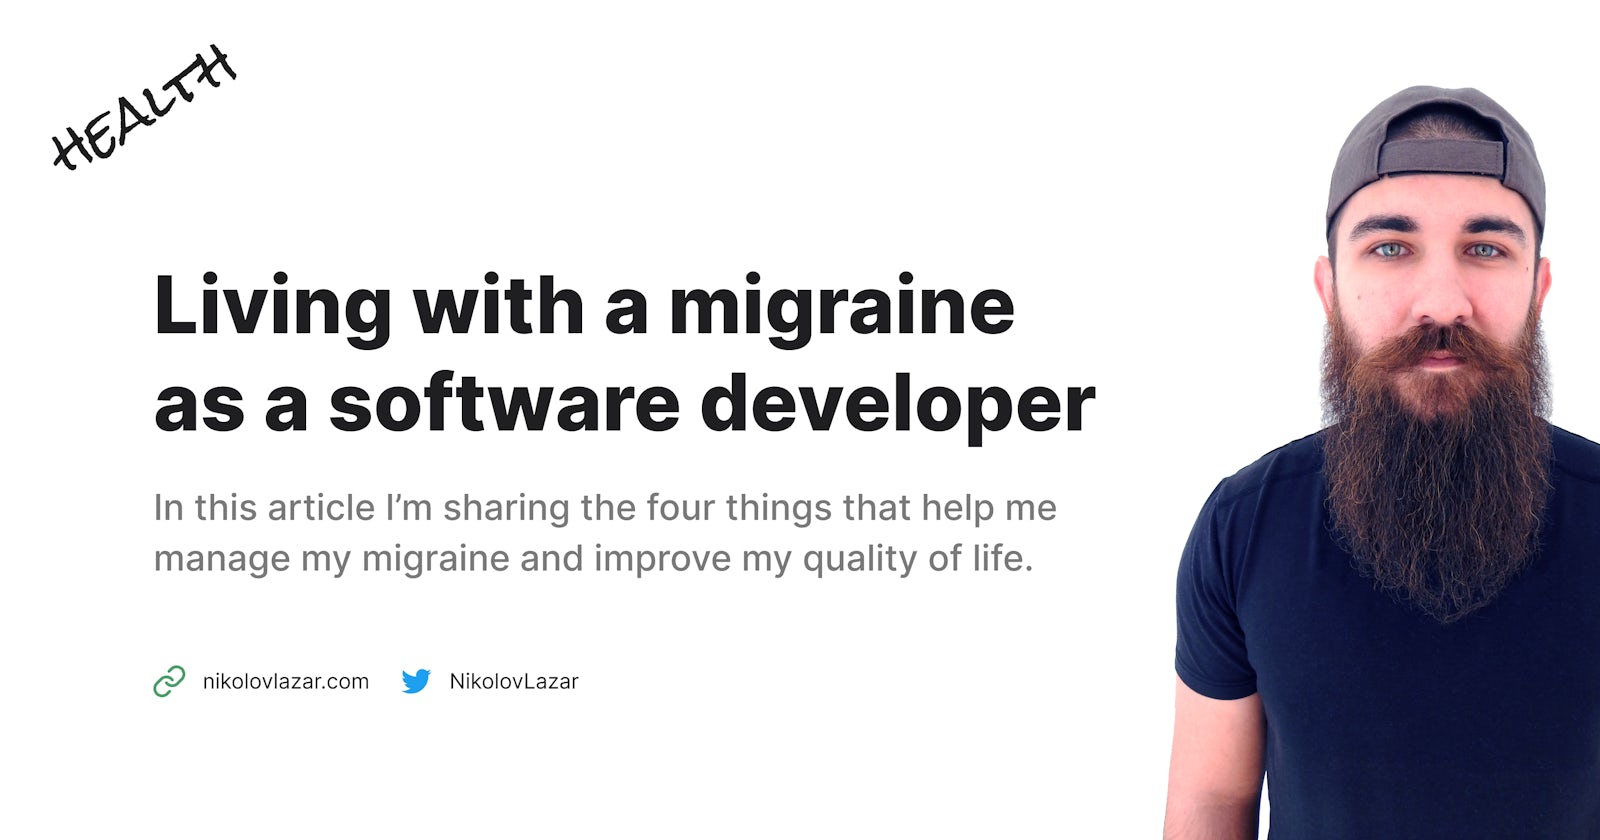 Living with a migraine as a software developer